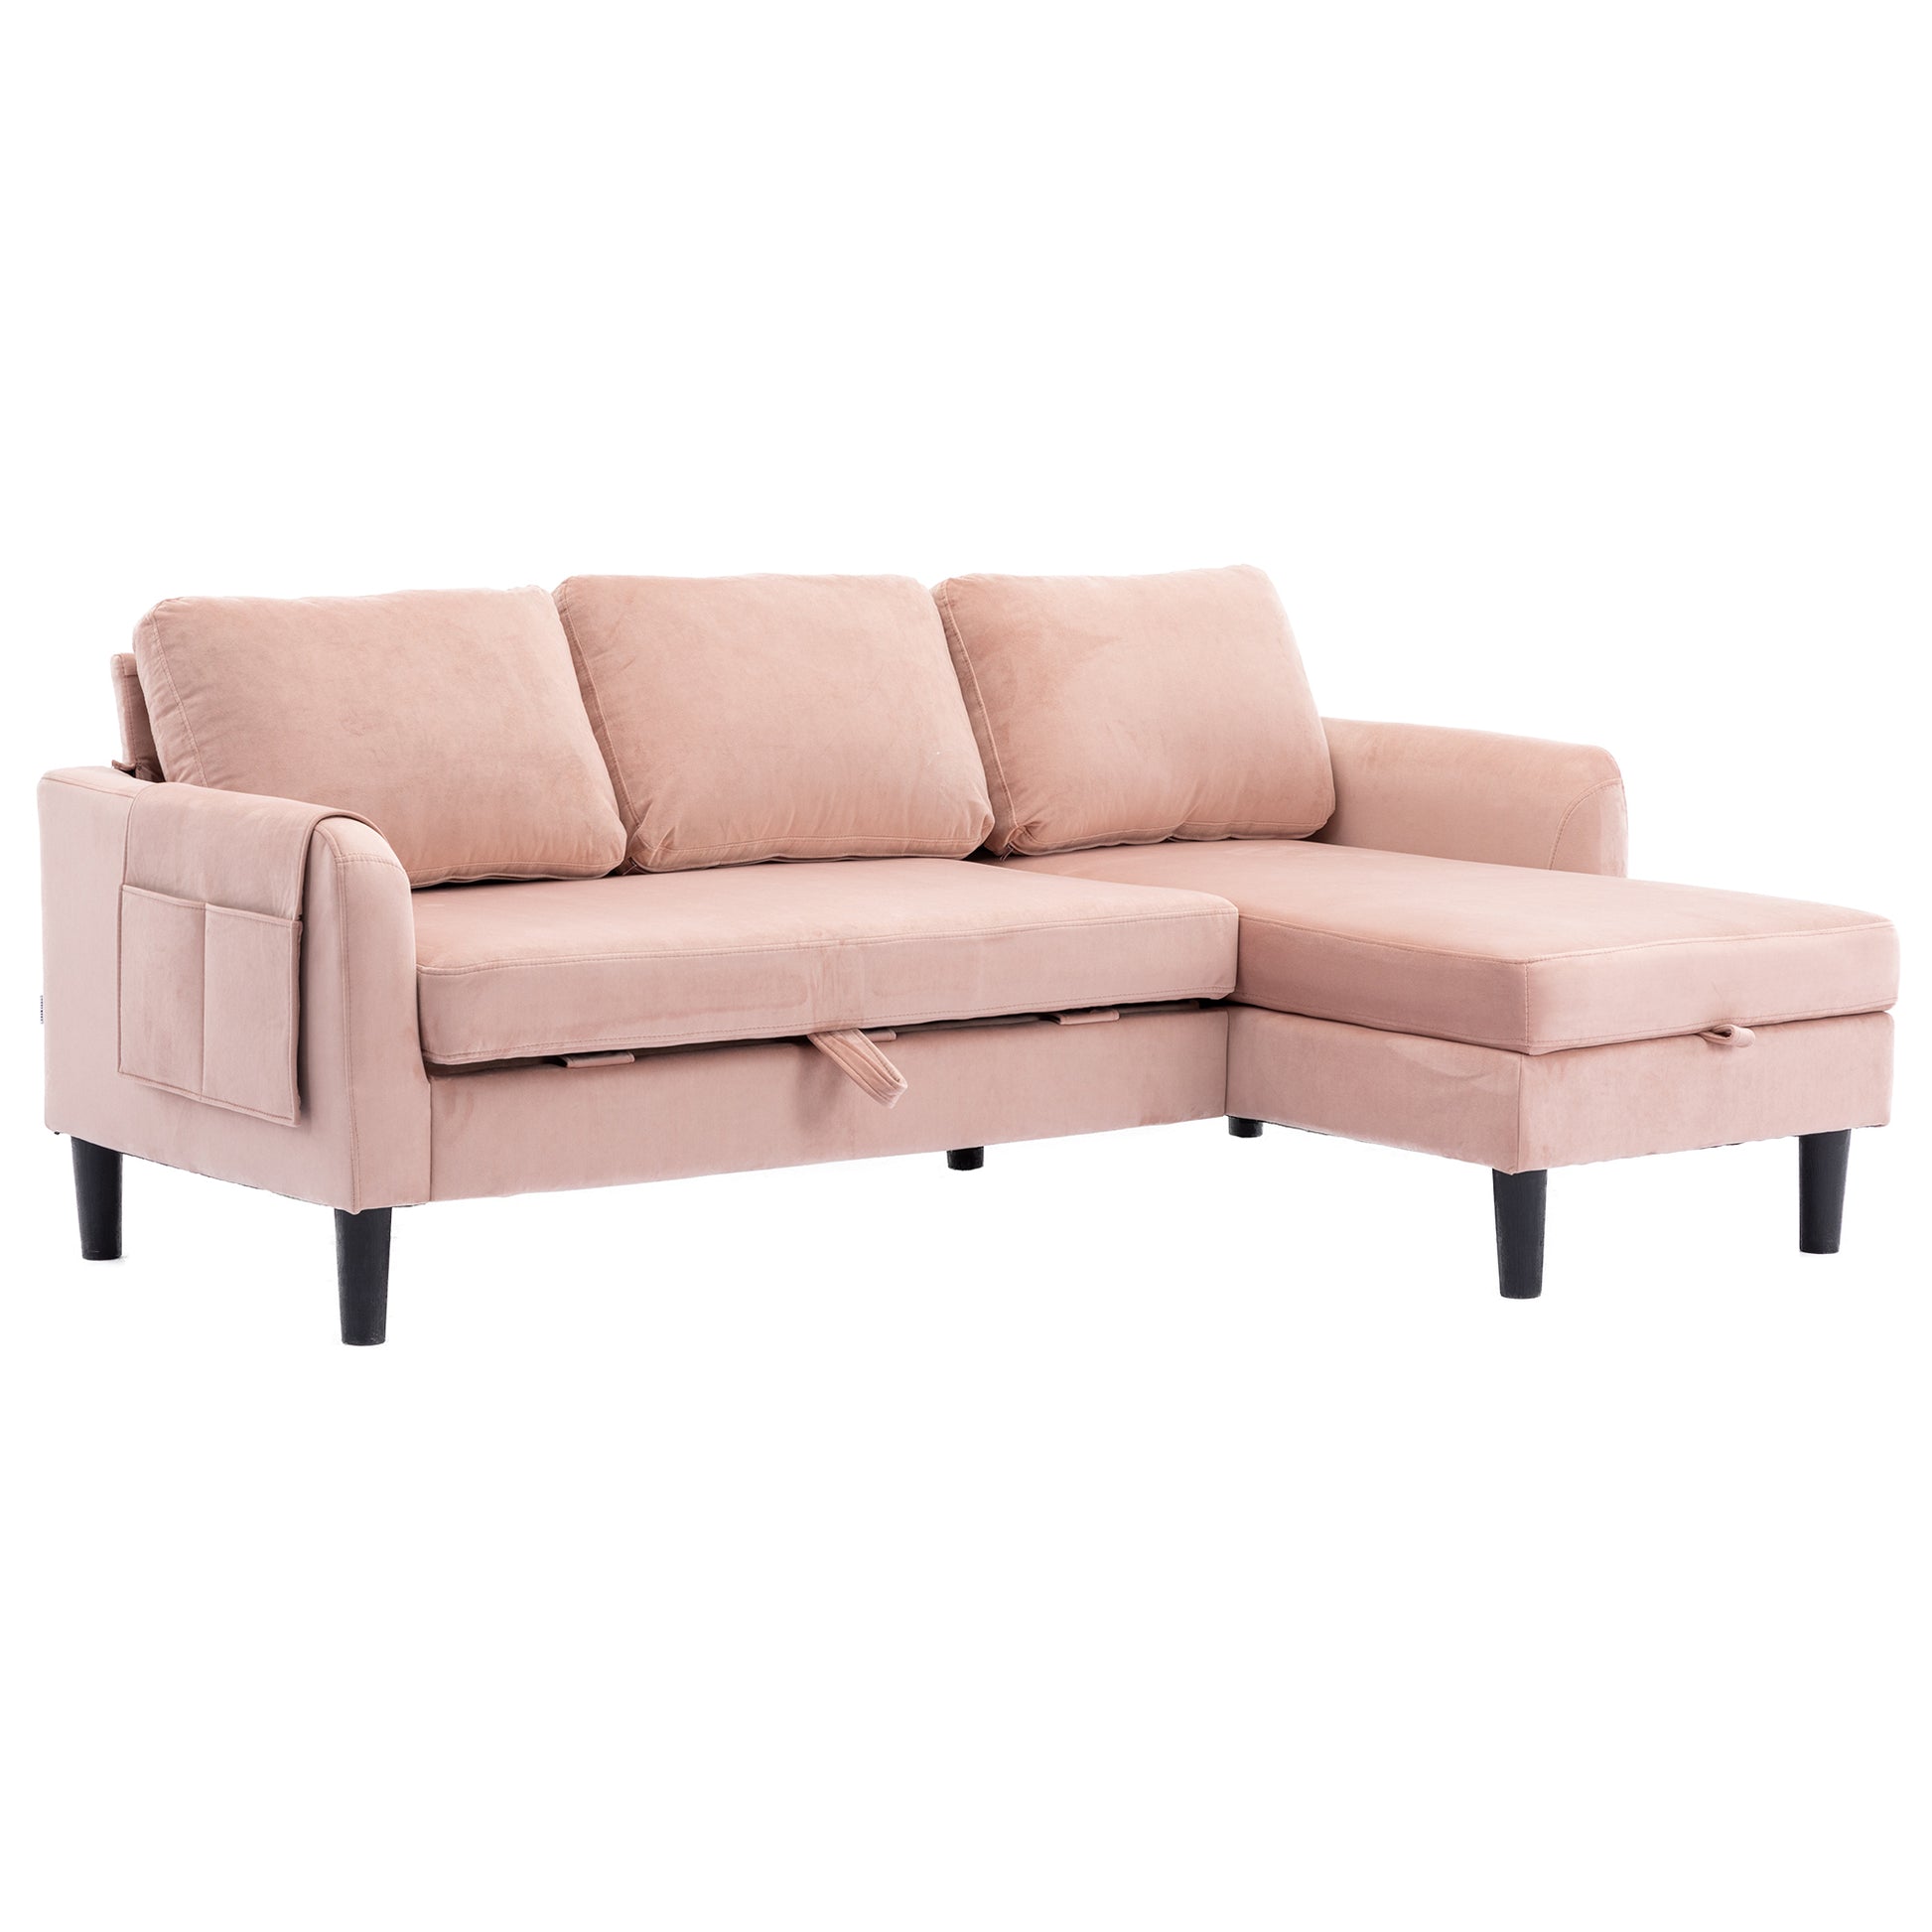 United Reversible Sleeper Sectional, Storage Chaise